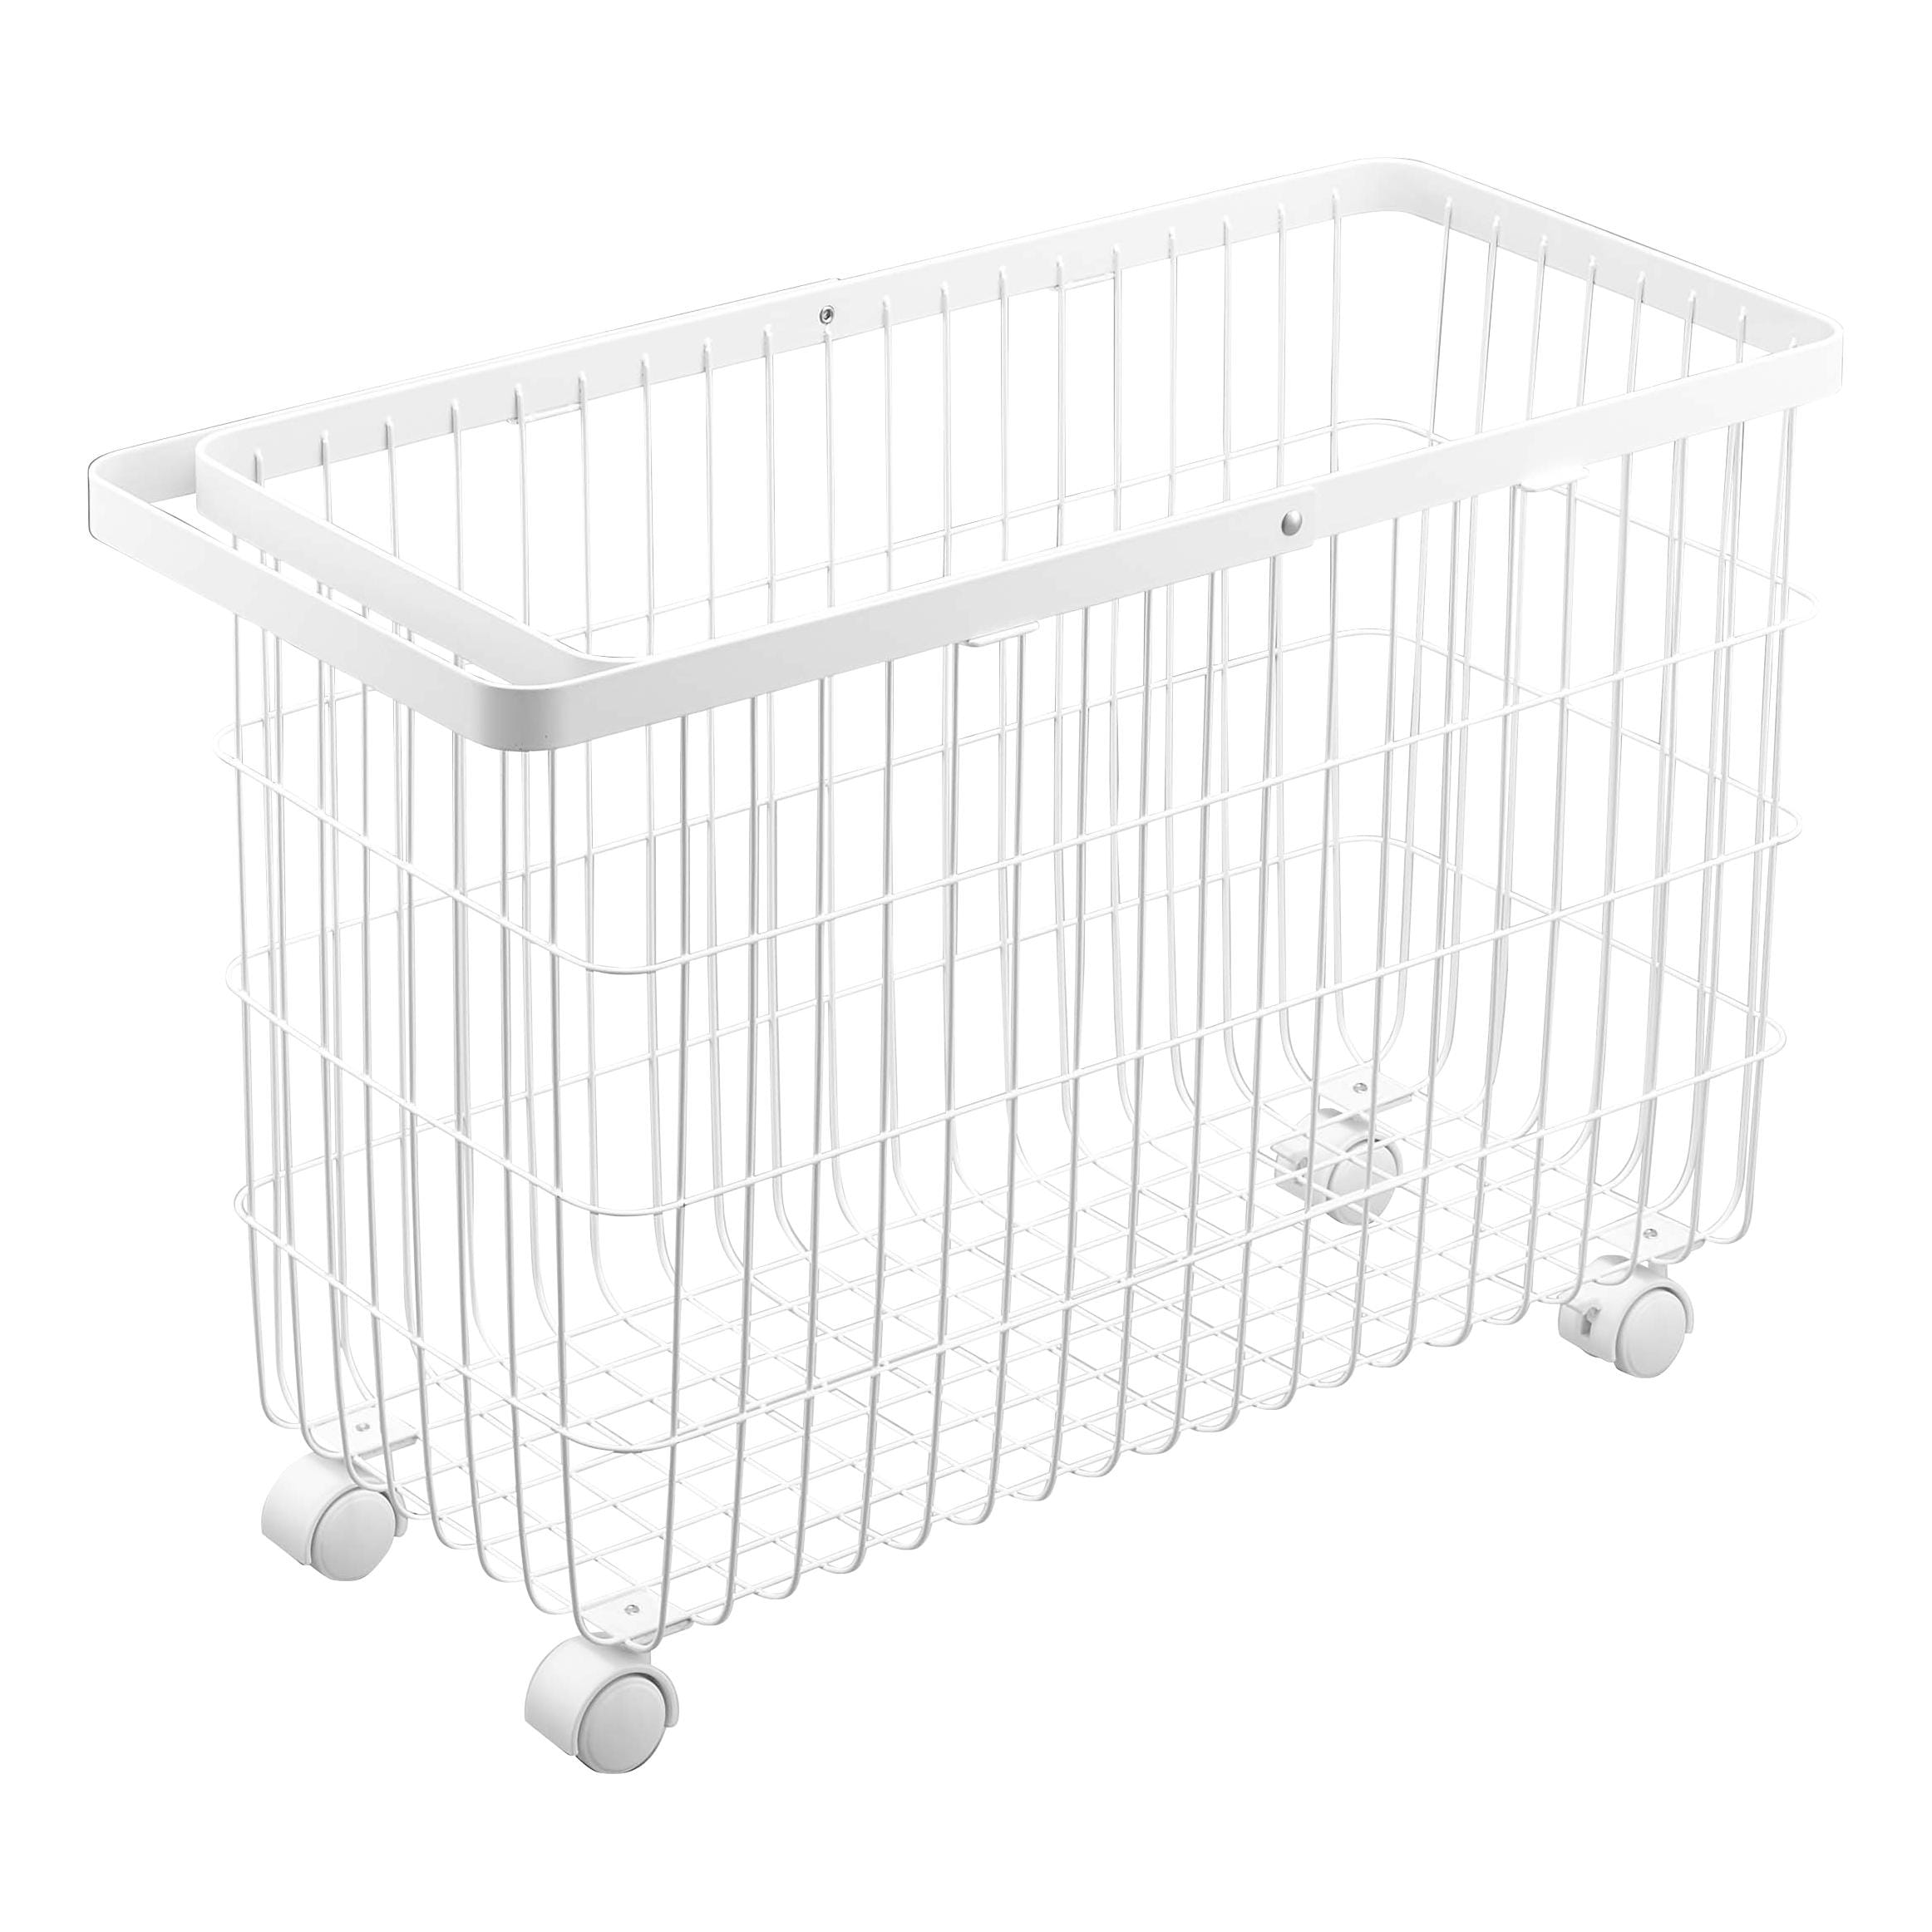 https://ak1.ostkcdn.com/images/products/is/images/direct/449cdf6d759aa912b0517713fc10f3cf9215b90a/Yamazaki-Home-Rolling-Wire-Basket%2C-Steel%2C-9.8-gallons%2C-35-liters%2C-Holds-11-lbs.jpg